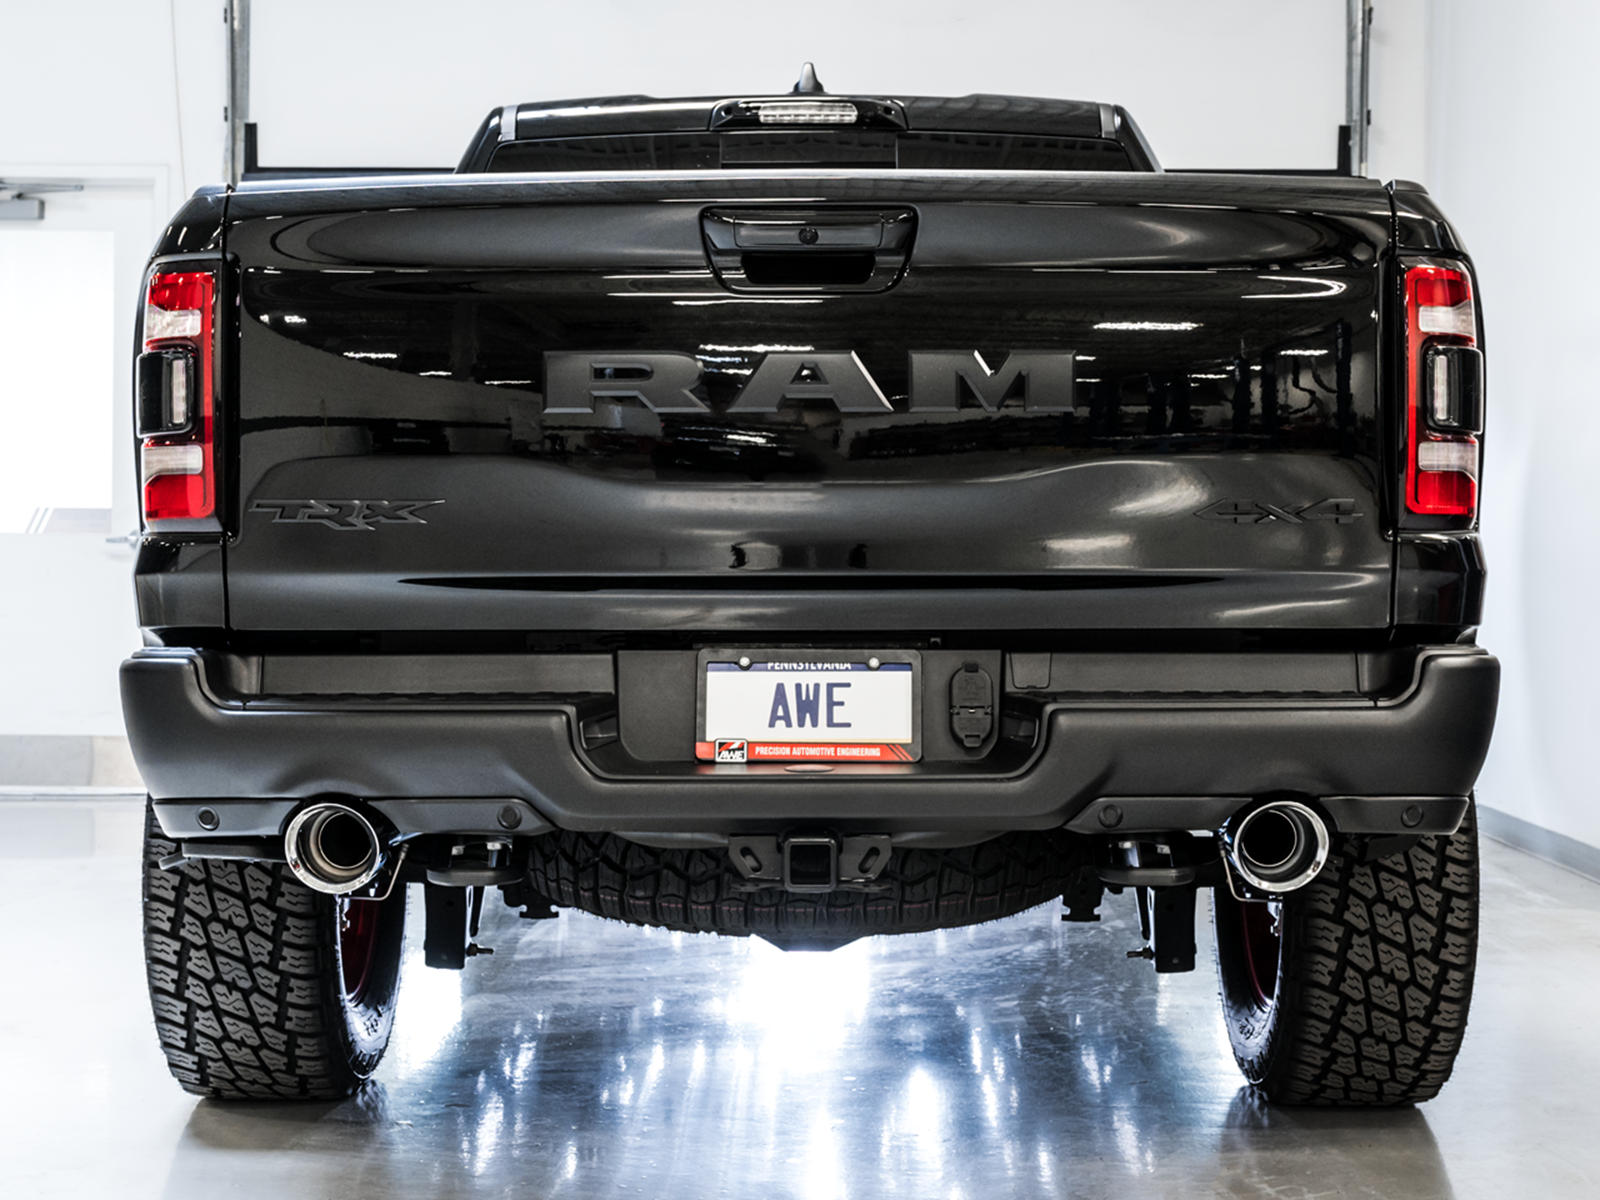 New Exhaust For Ram 1500 TRX Adds Power And Noise | CarBuzz